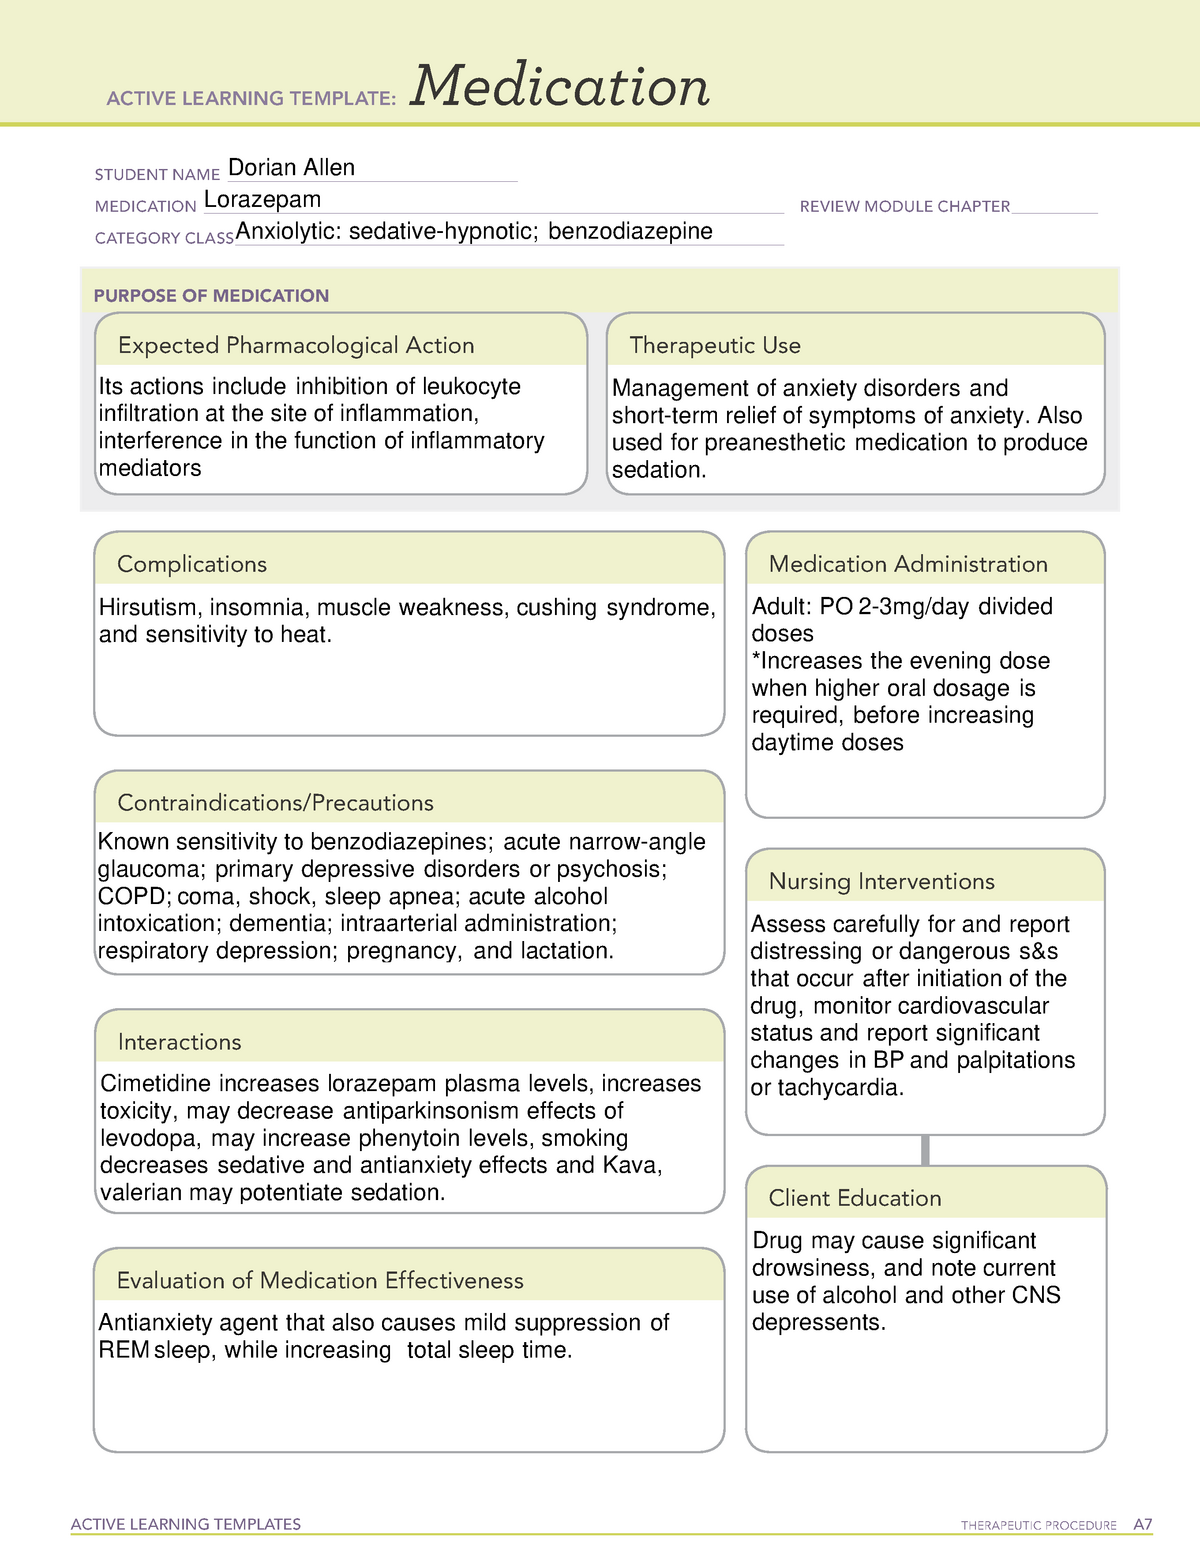 Week 8 Lorazepam ACTIVE LEARNING TEMPLATES THERAPEUTIC PROCEDURE A